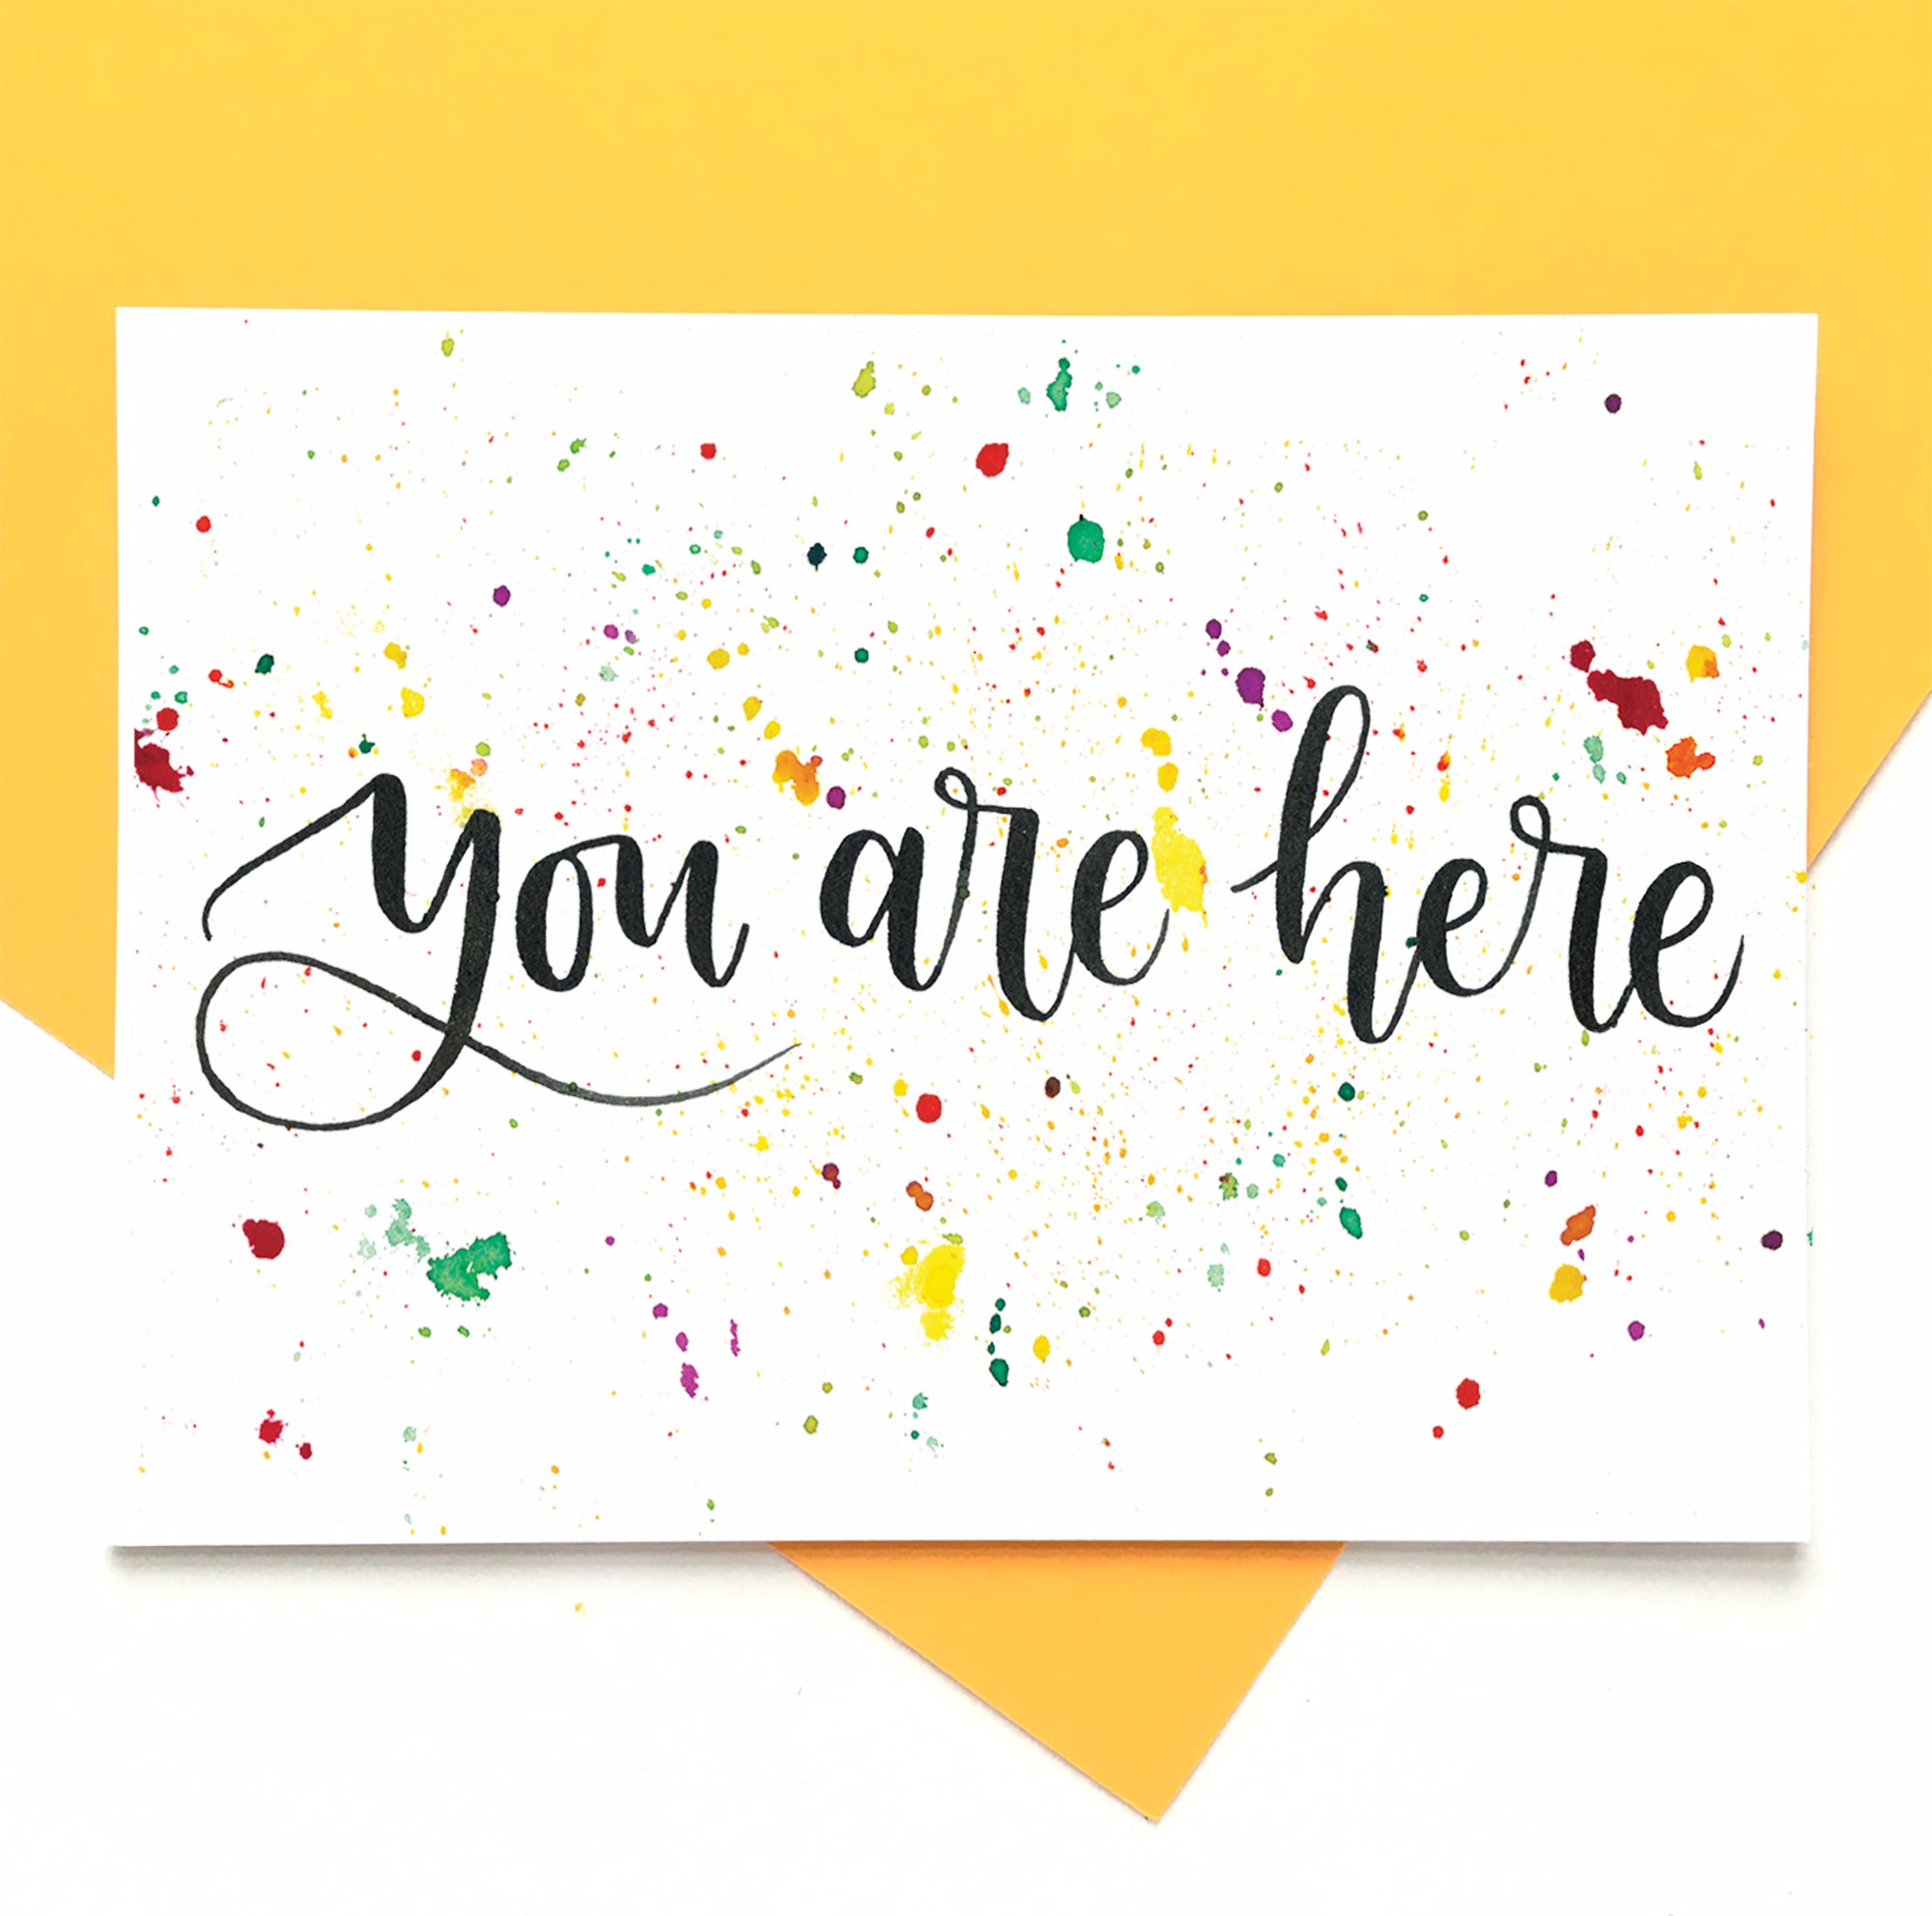 You are here - A6 postcard printed on recycled card